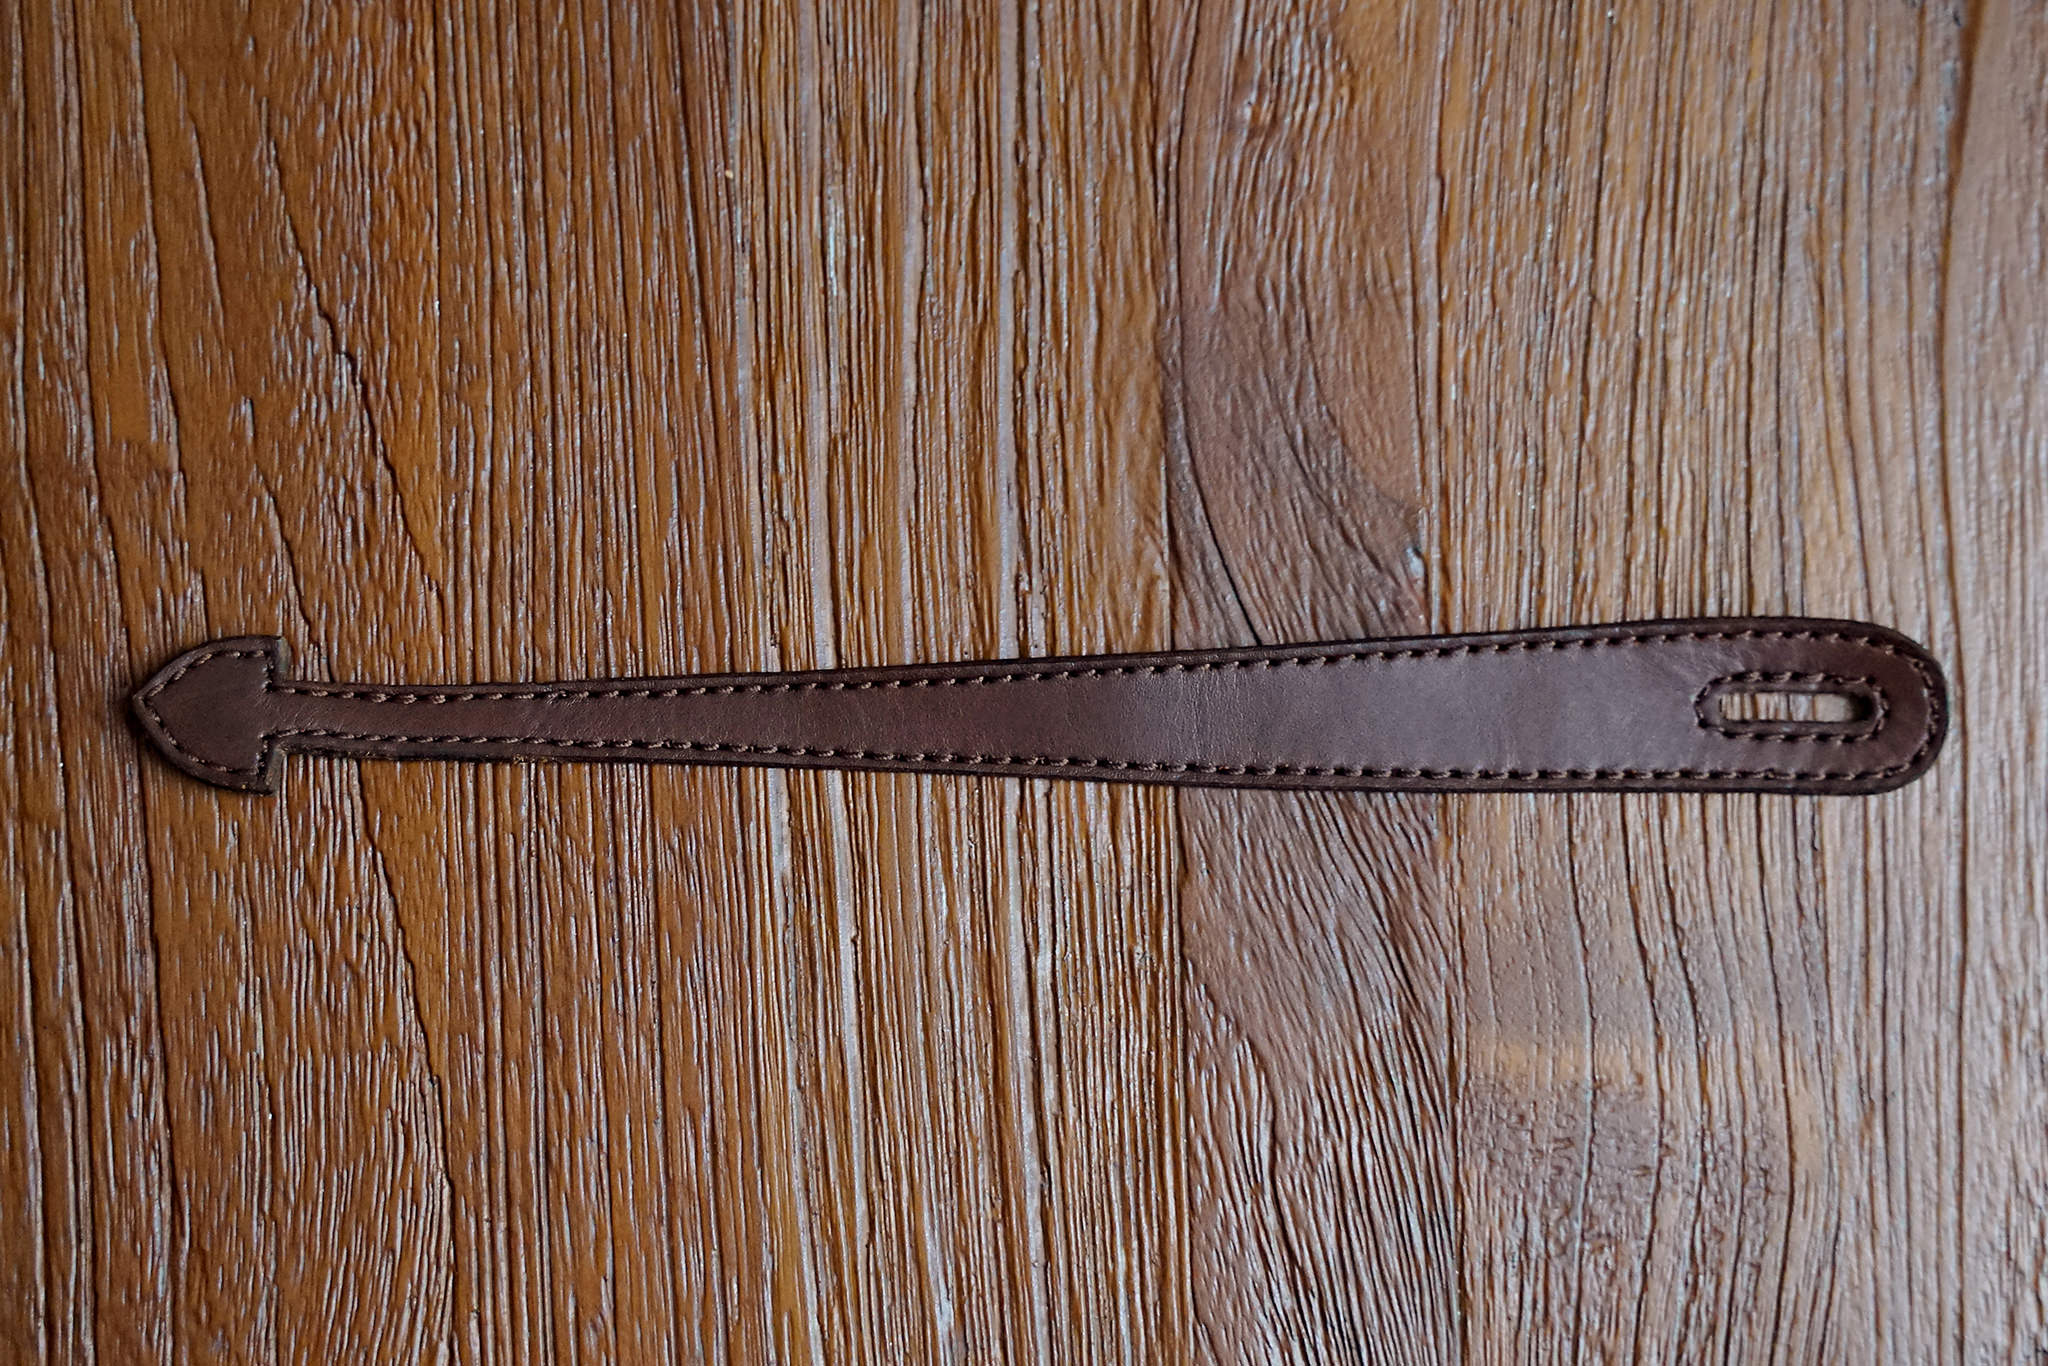 Complimentary leather headstock loop, note the design is not final, the loop you receive might have different details. Image for illustration only.